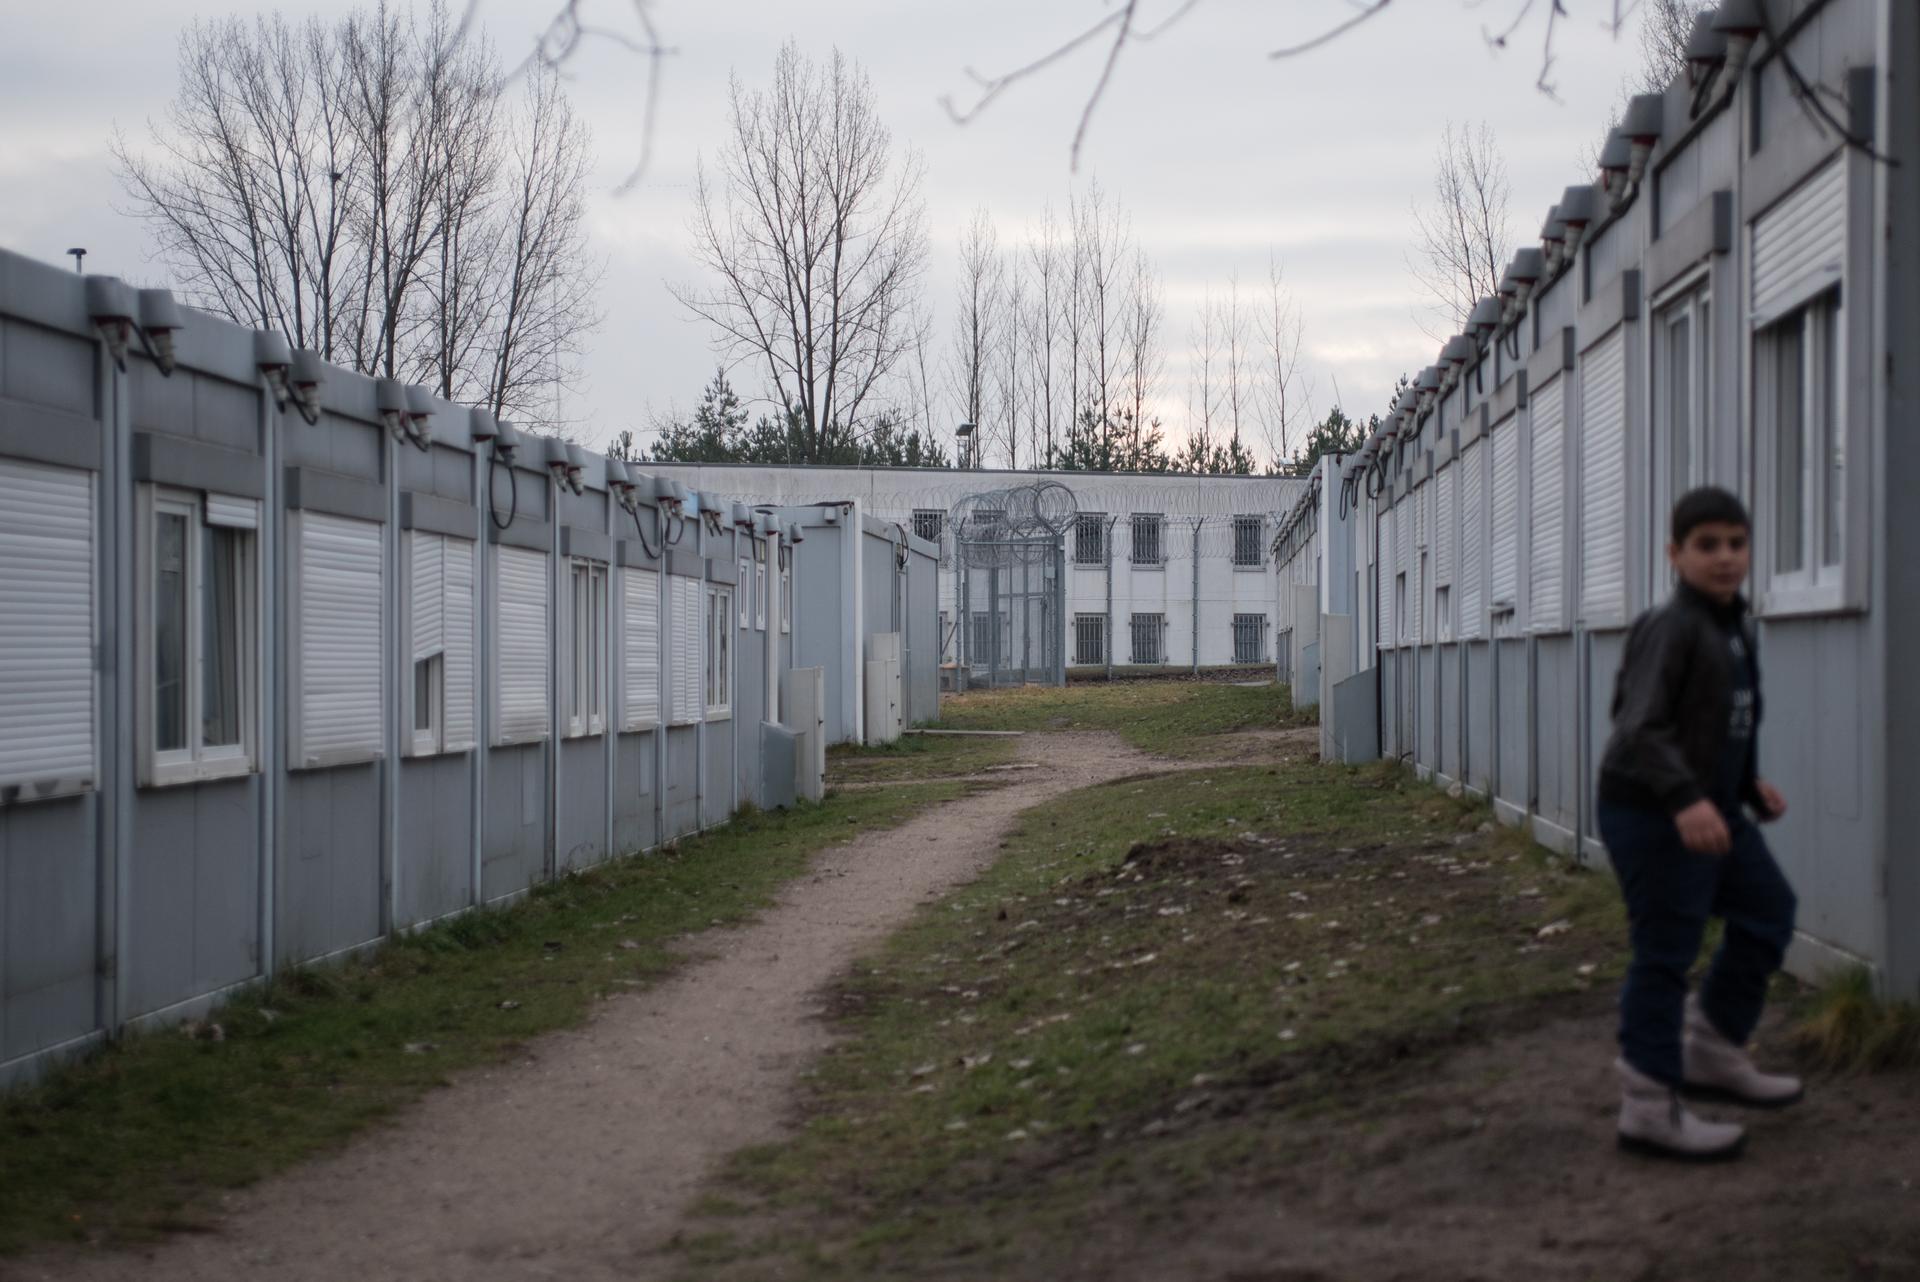 For asylum seekers at the Eisenhüttenstadt Refugee Center, these trailers are a temporary home while they wait for their application process to be completed. Some families end up living here for several months.